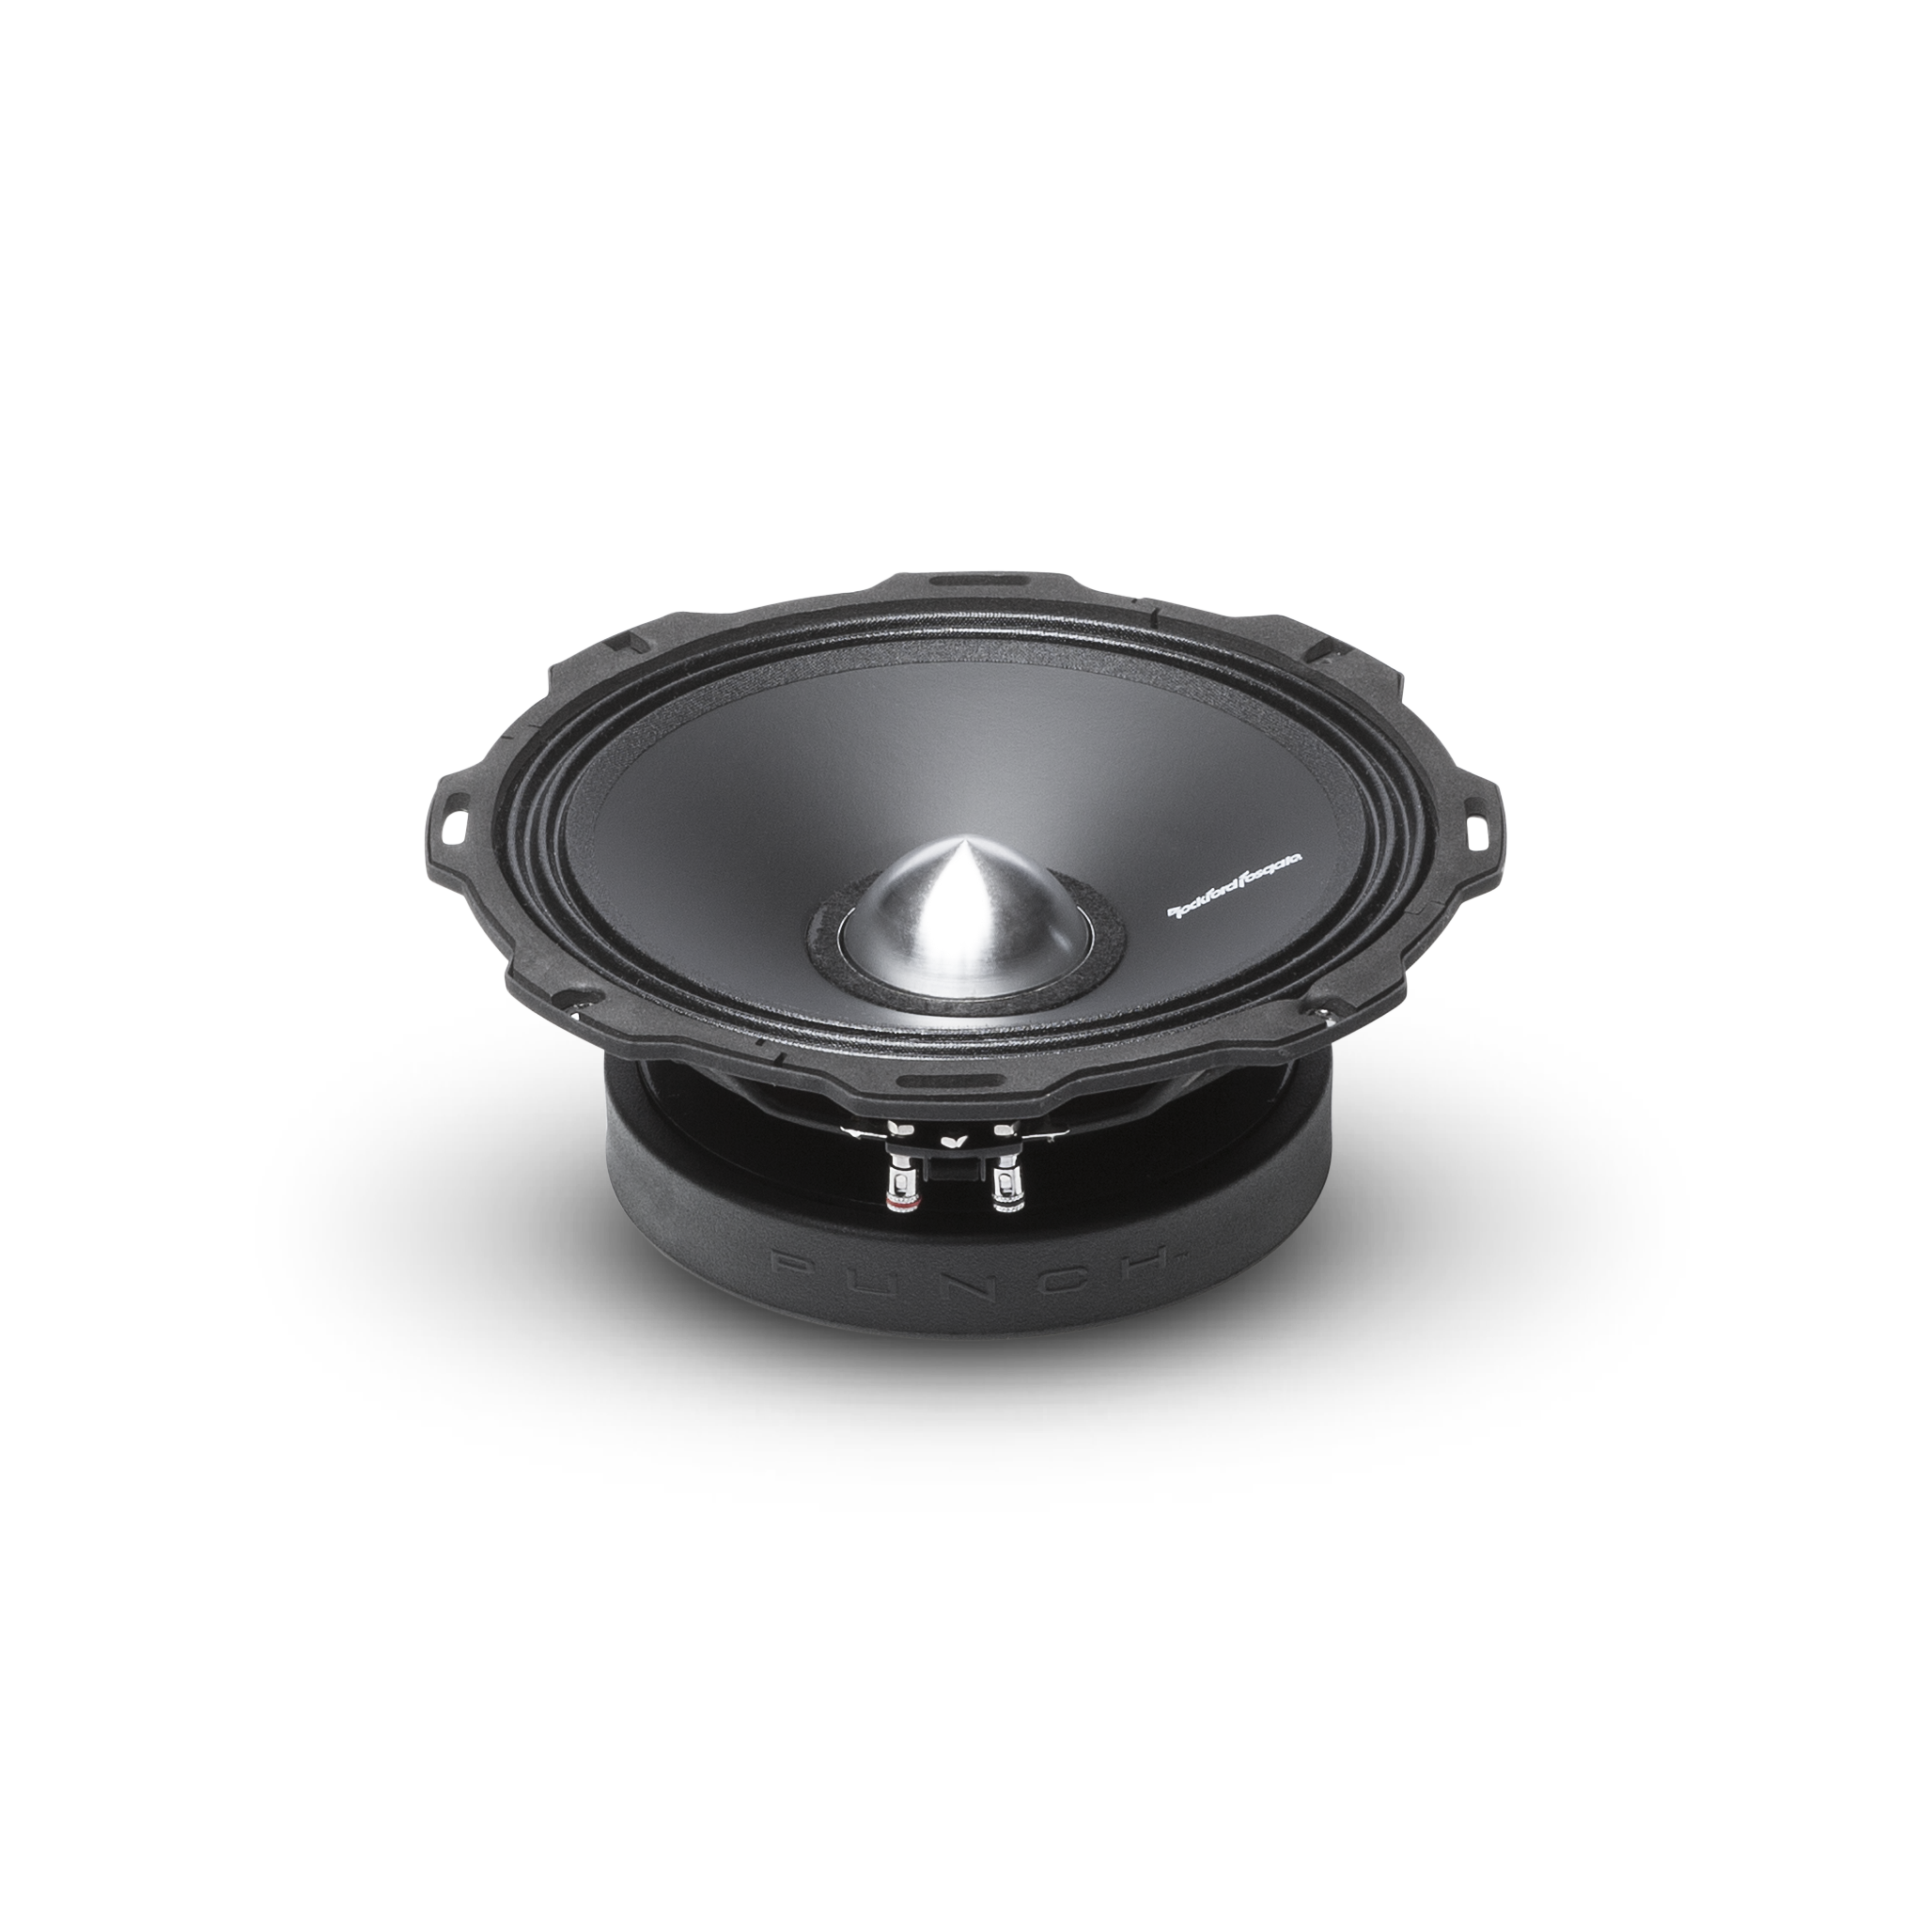 Rockford Fosgate PUNCH Pro Mid-Bass pps4-8 